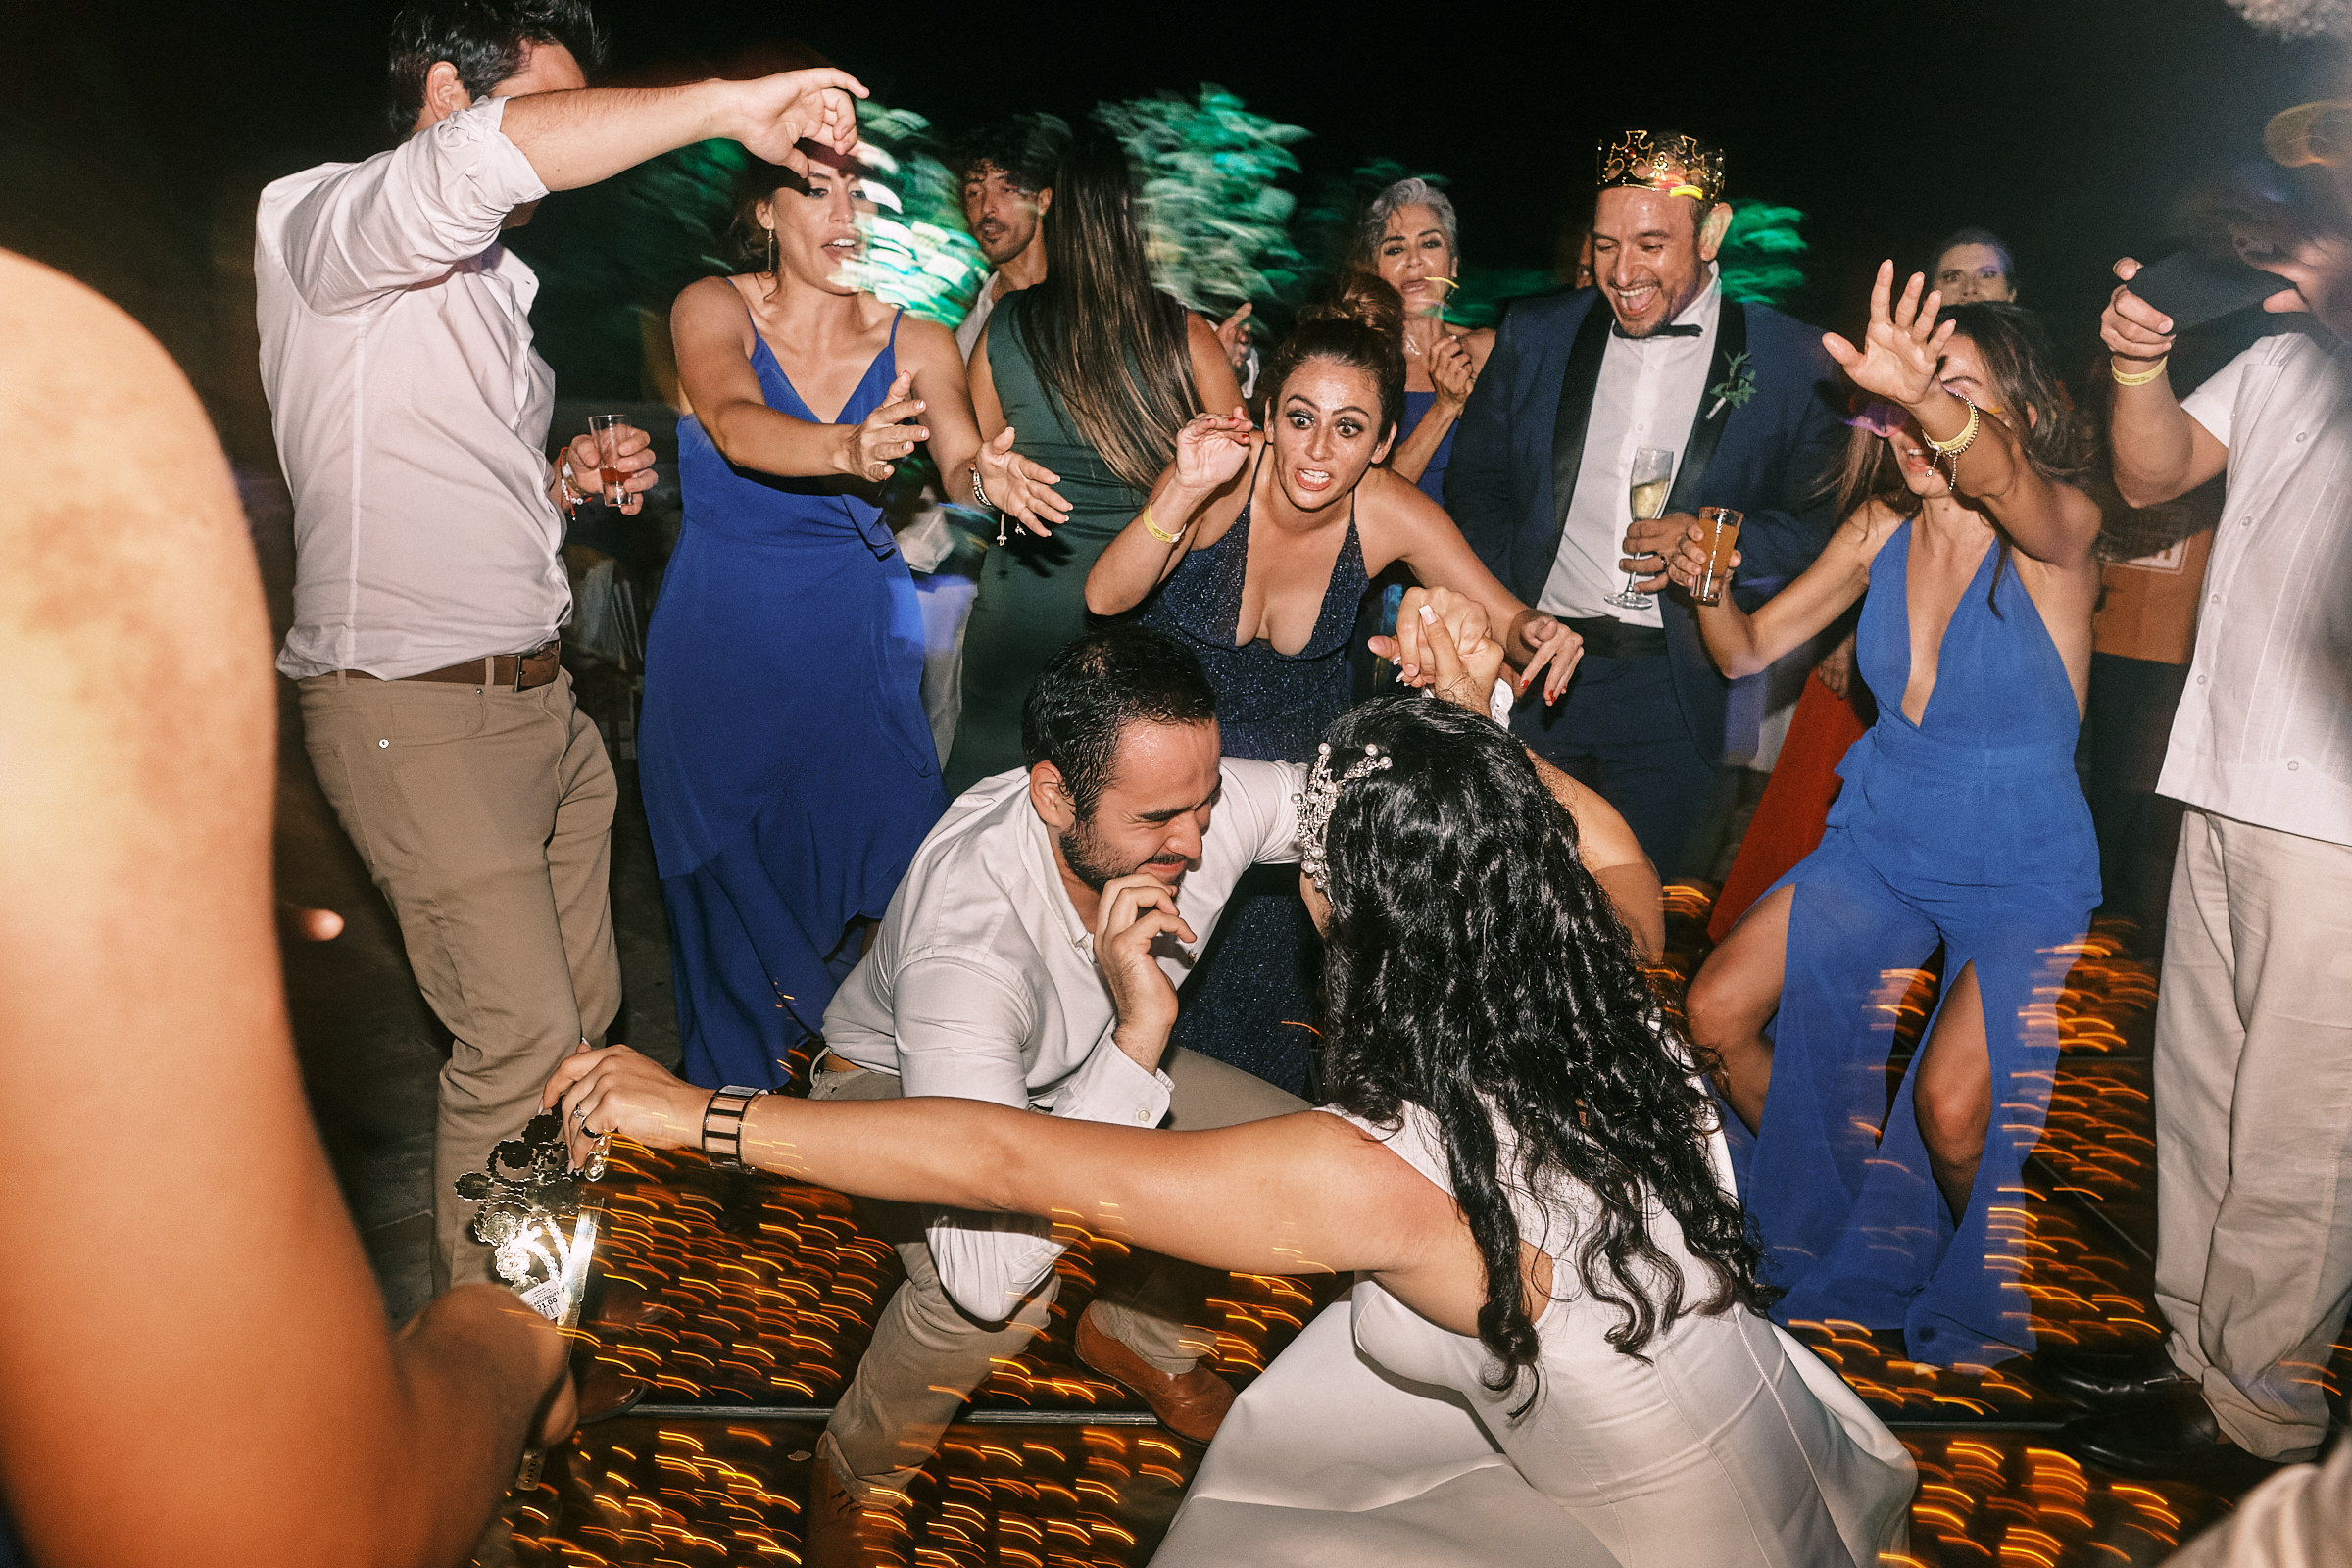 Crazy Moment In The Dance Floor At Wedding In Mexico